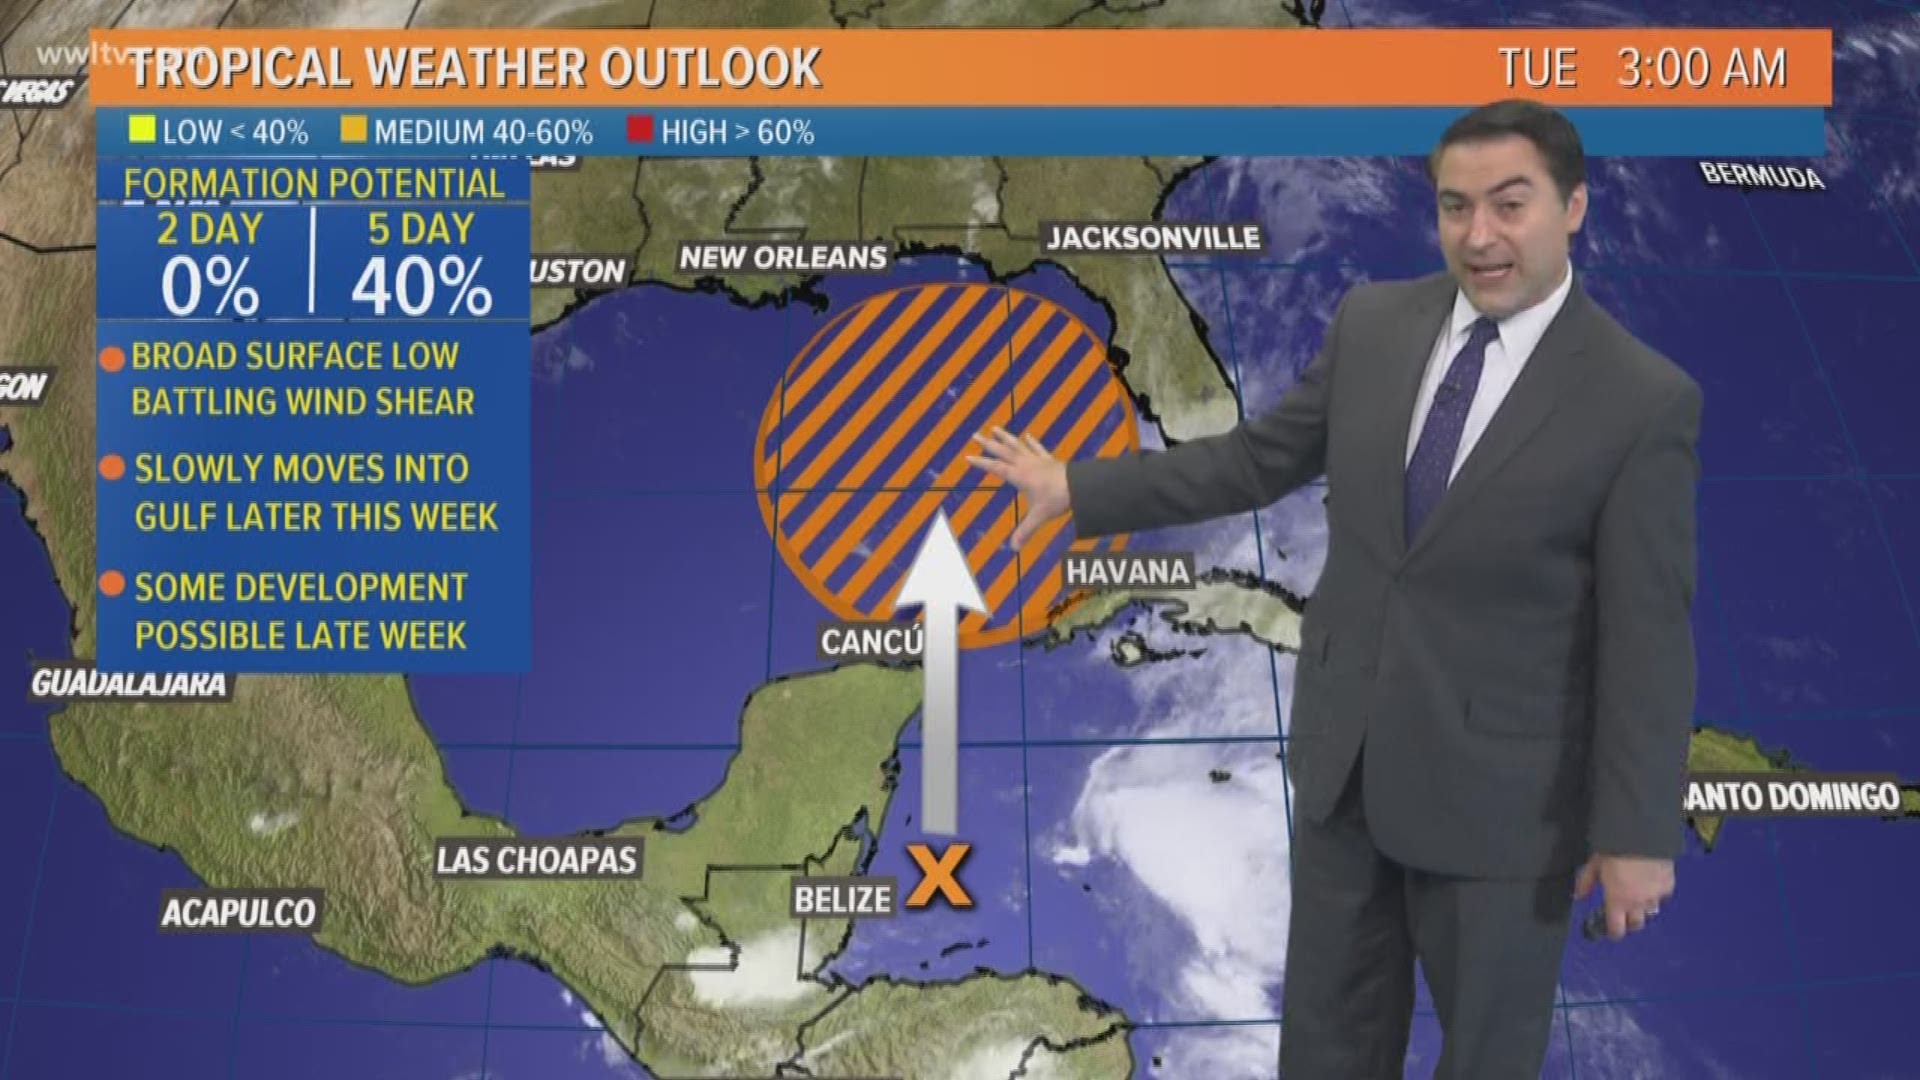 Meteorologist Dave Nussbaum says expect more scattered storms today with heavy rain that could lead to street flooding. Plus, he has an update on Invest 90 in the Caribbean.